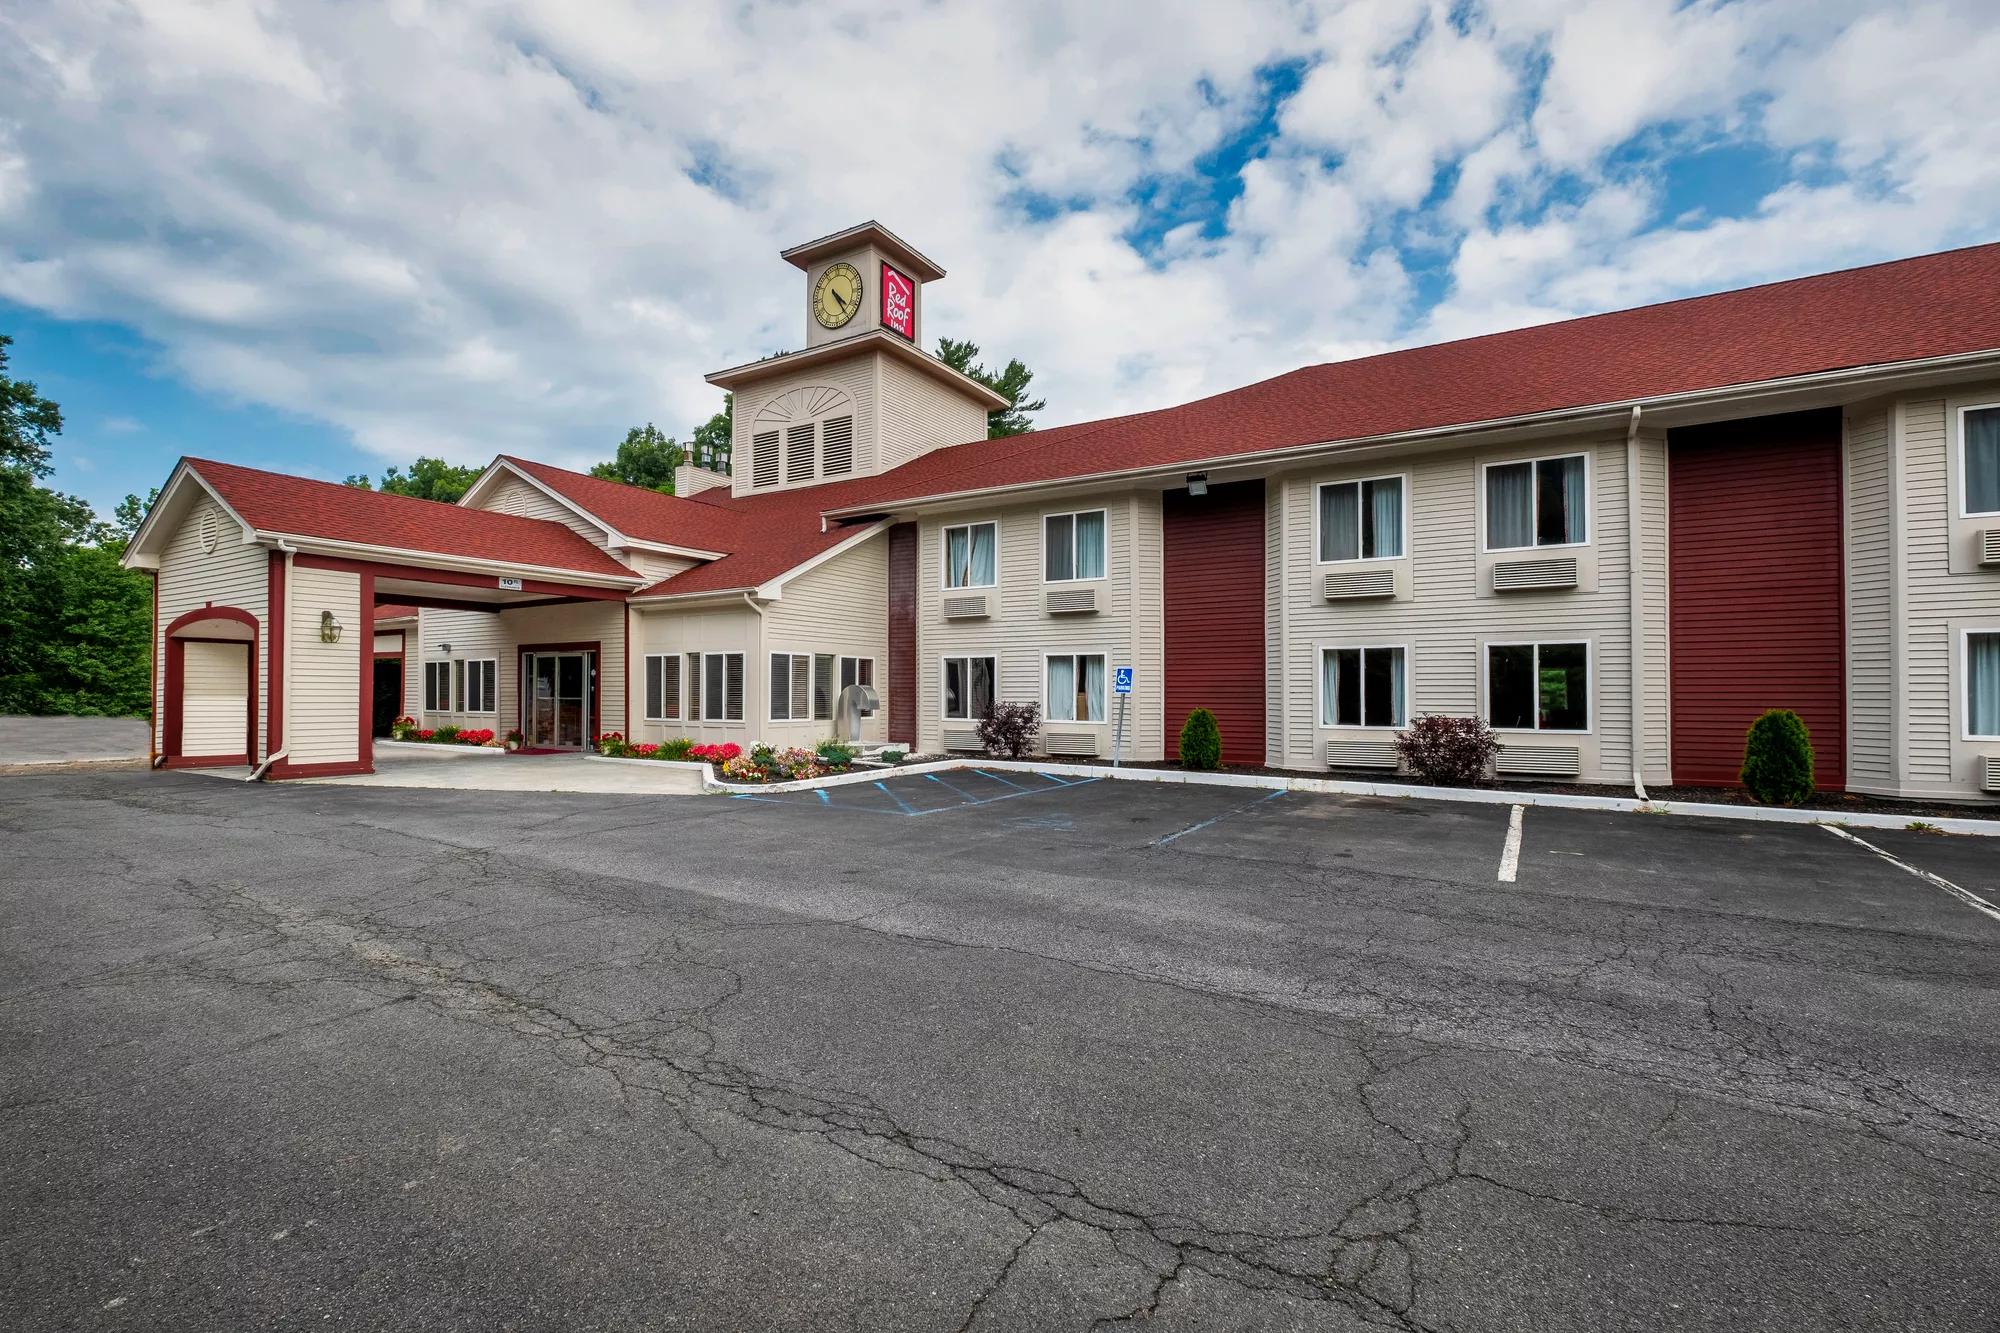 Red Roof Inn Clifton Park Exterior Property Image Details